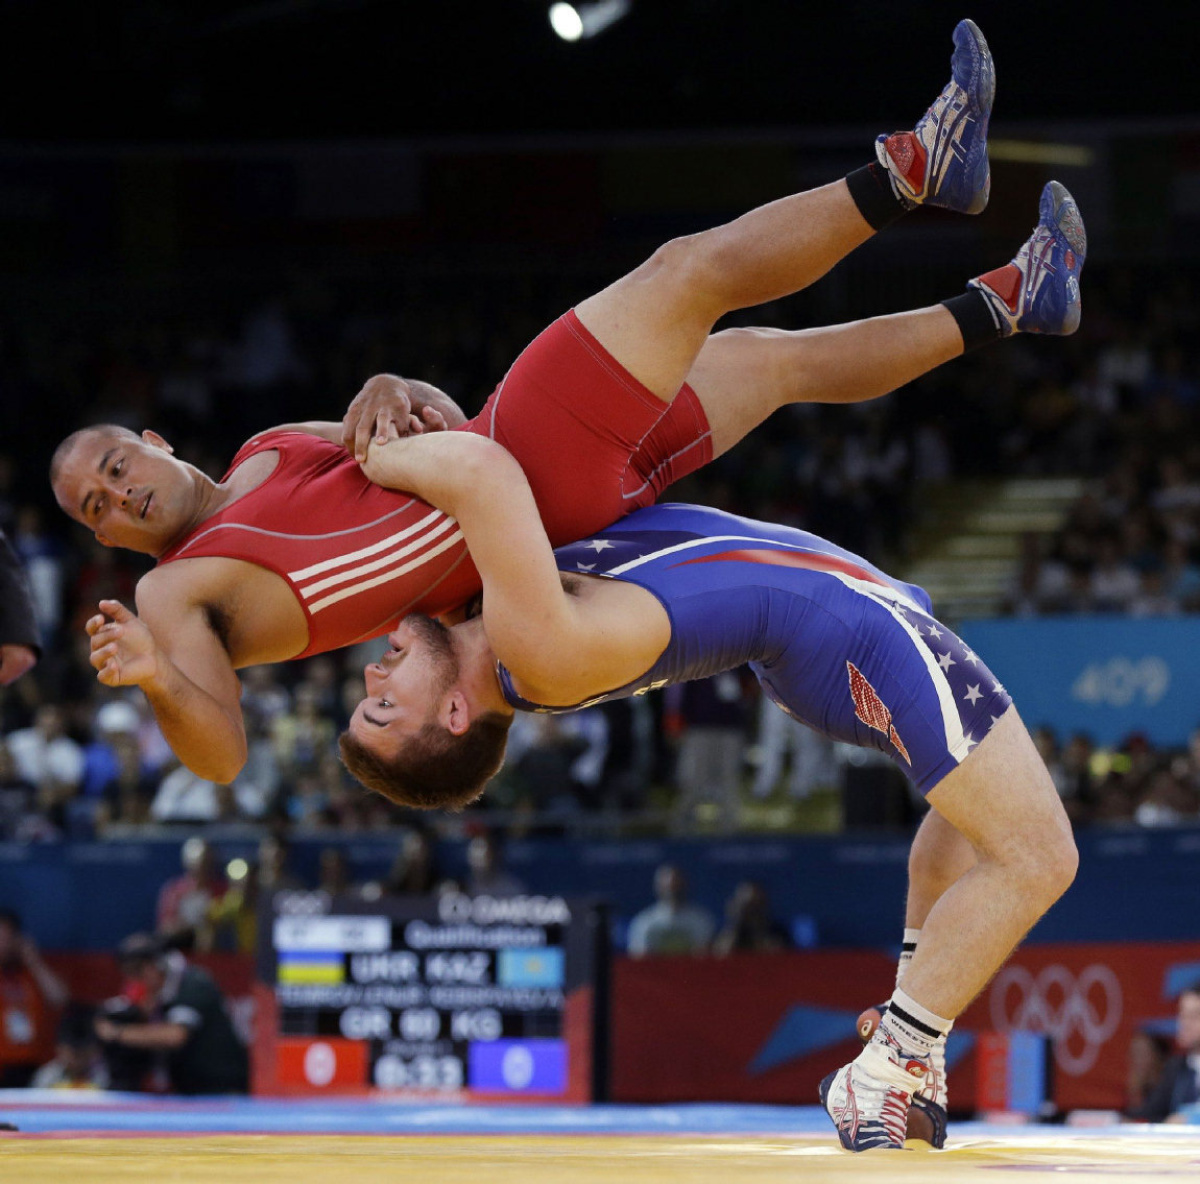 Starting in 2020, wrestling will no longer be a featured sport in the Olymp...